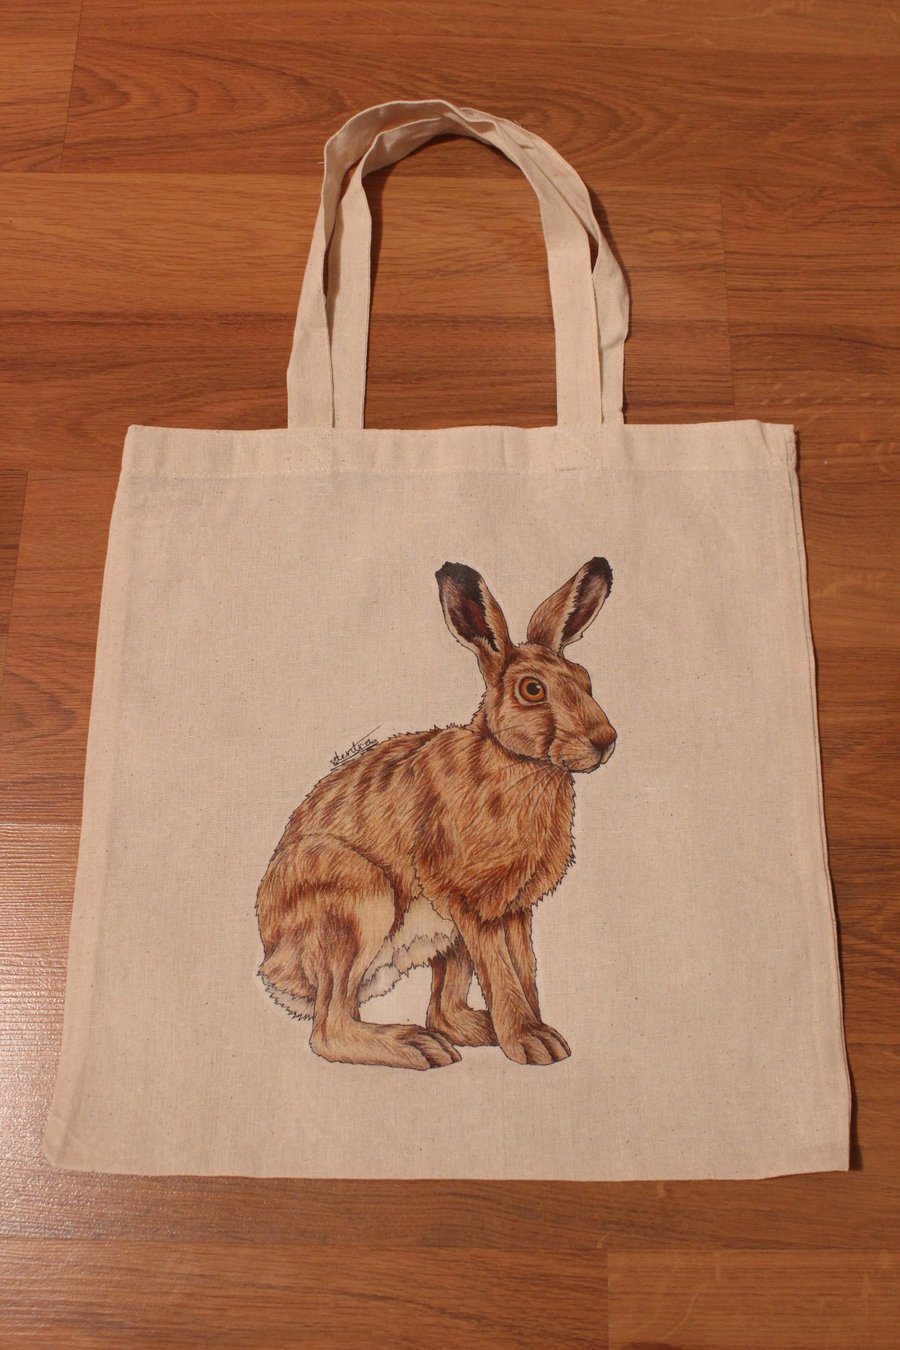 SALE ITEM - Hare Eco Fabric Reusable Shopping Tote Bag